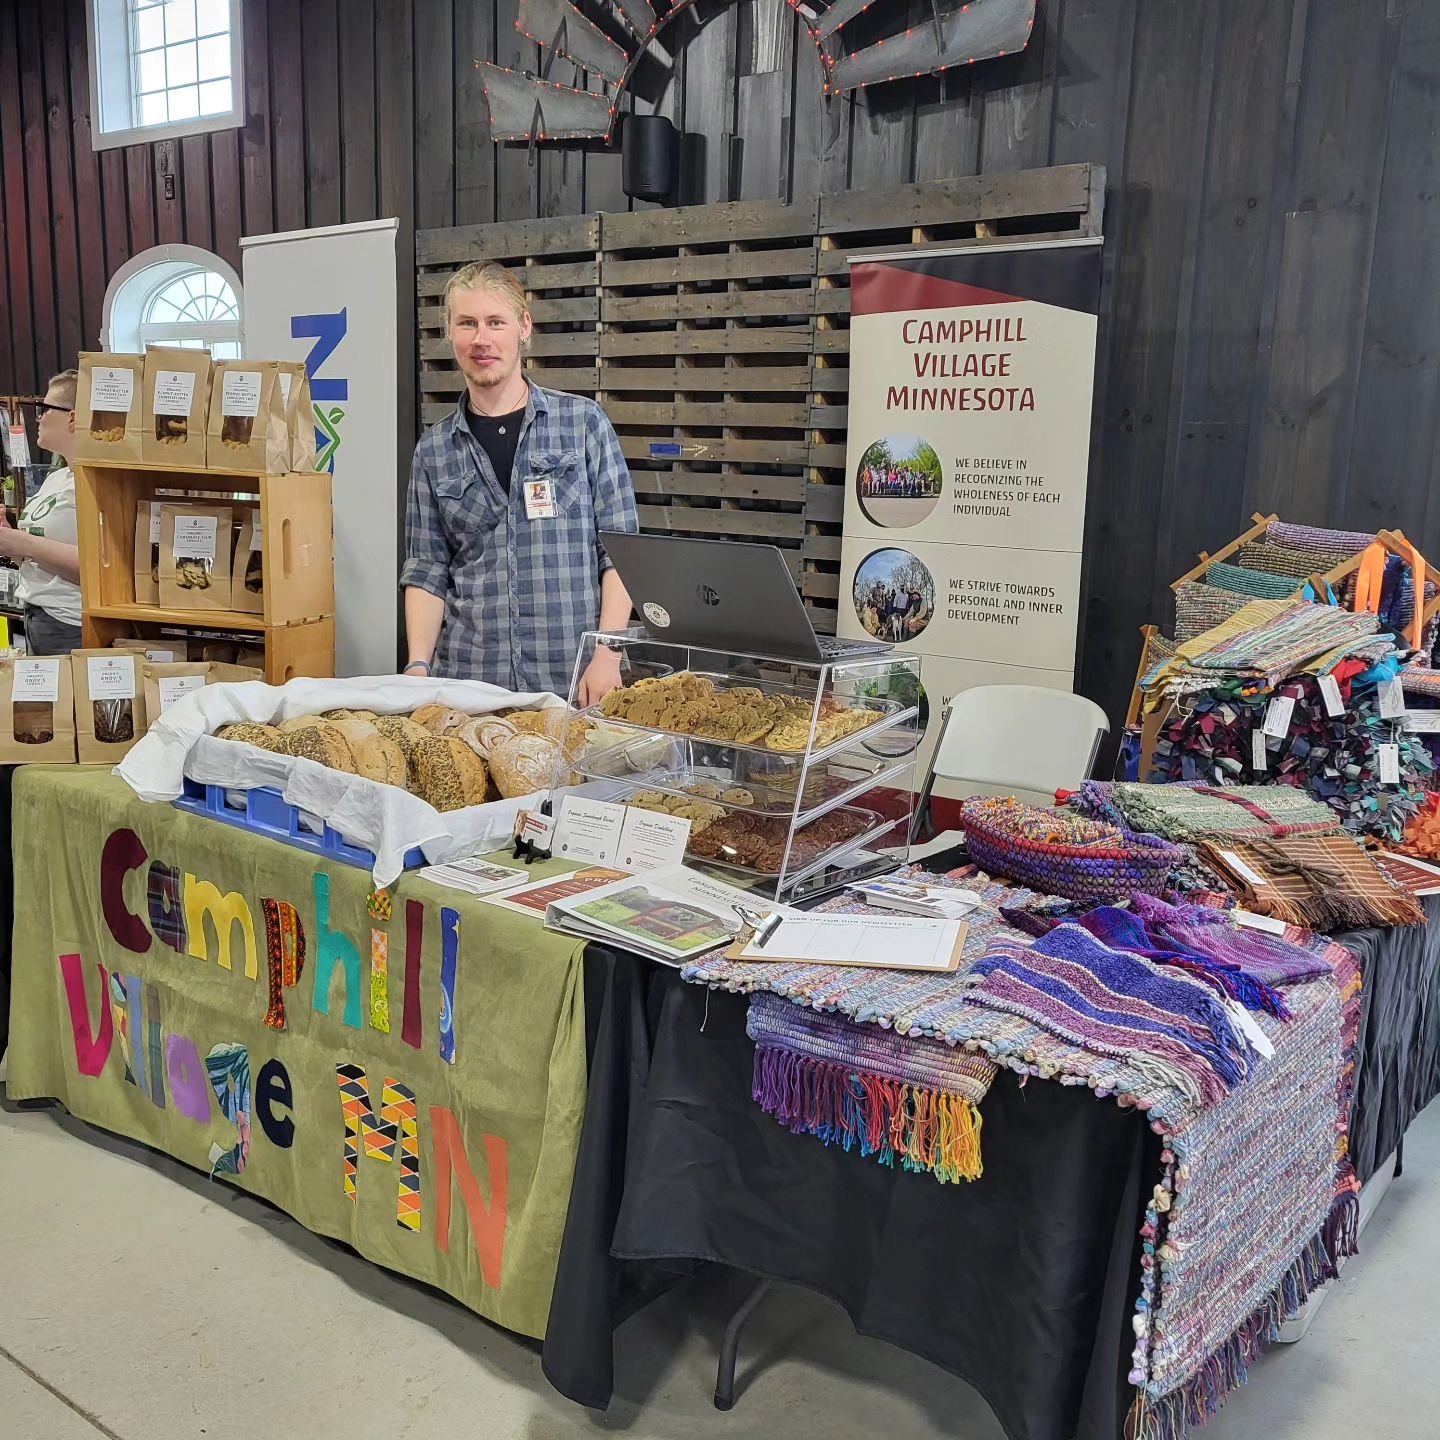 Come check out the Spring Out event at The Barn in Sauk Centre, MN, today! 

We are selling cookies, sourdough and dinkelbrot bread (collab with @thebeckbakery ), lots of rugs and weavery items. 

We would love to see you!